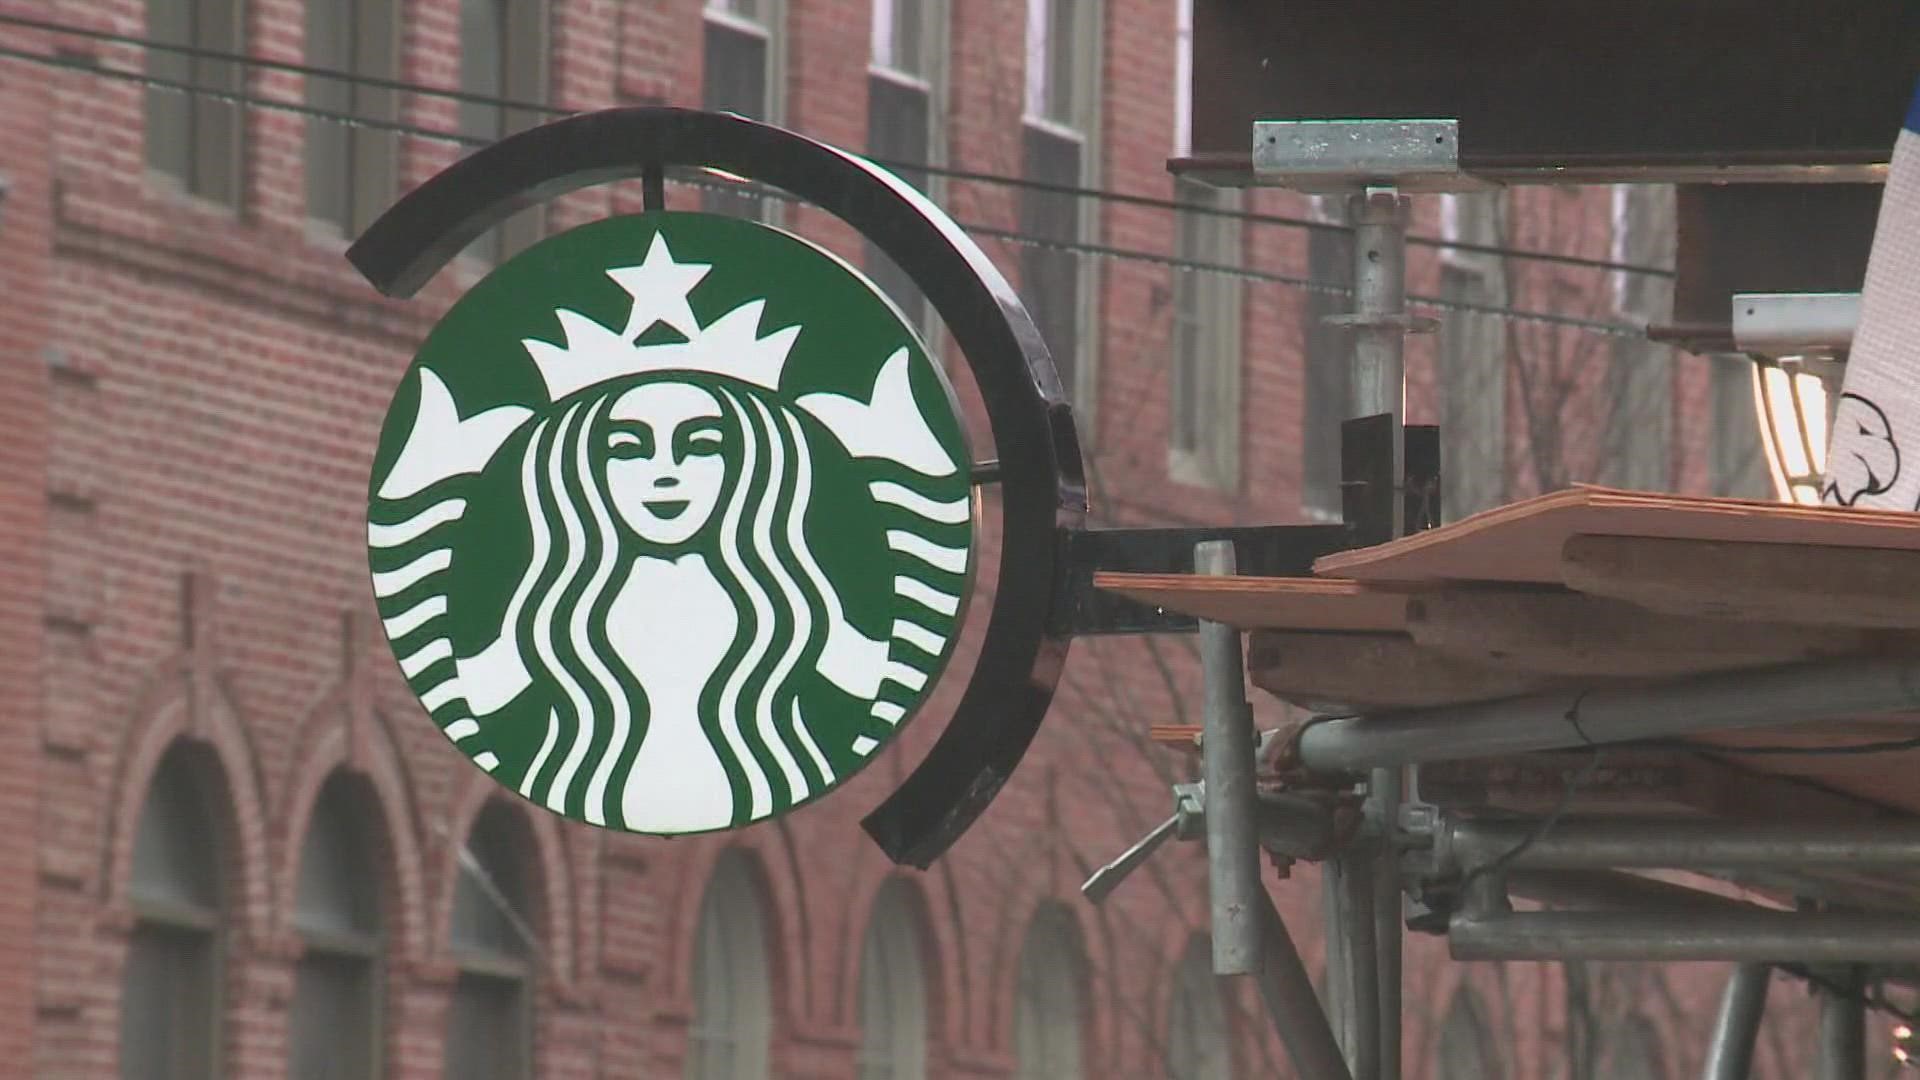 The Starbucks in Portland's Old Port is closing less than a month after employees voted to form a union.